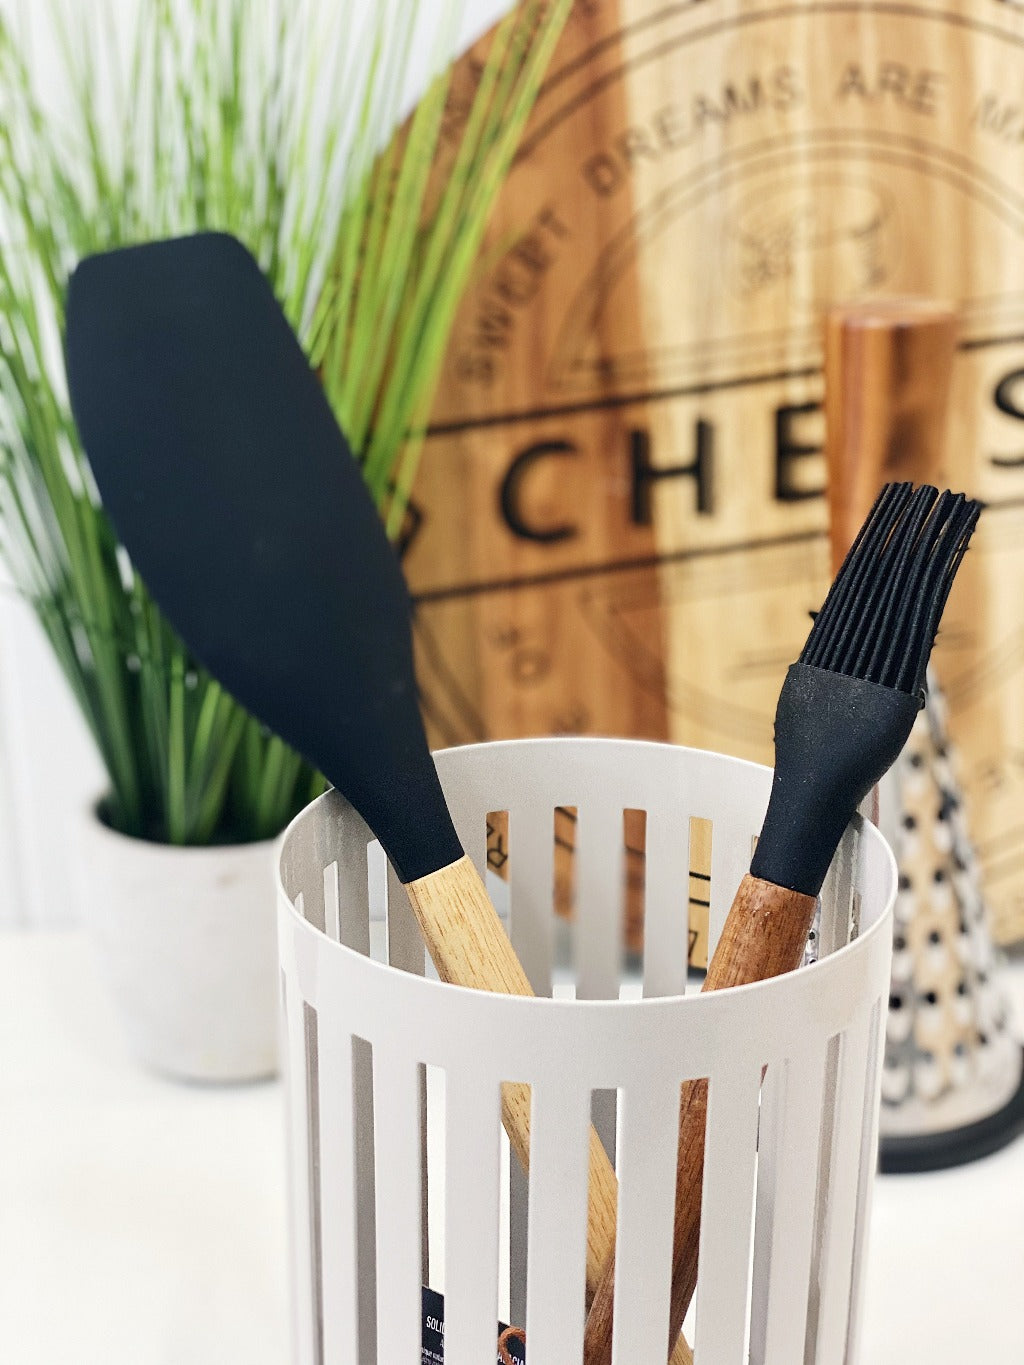 Bialetti St Clare Acacia Handle Silicone Pastry Brush - Kitchen Utensils - black silicone head - heat resistant up to 500degrees - solid acacia handle |Bliss Gifts &amp; Homewares - Unit 8, 259 Princes Hwy Ulladulla - Shop Online &amp; In store - 0427795959, 44541523 - Australia wide shipping